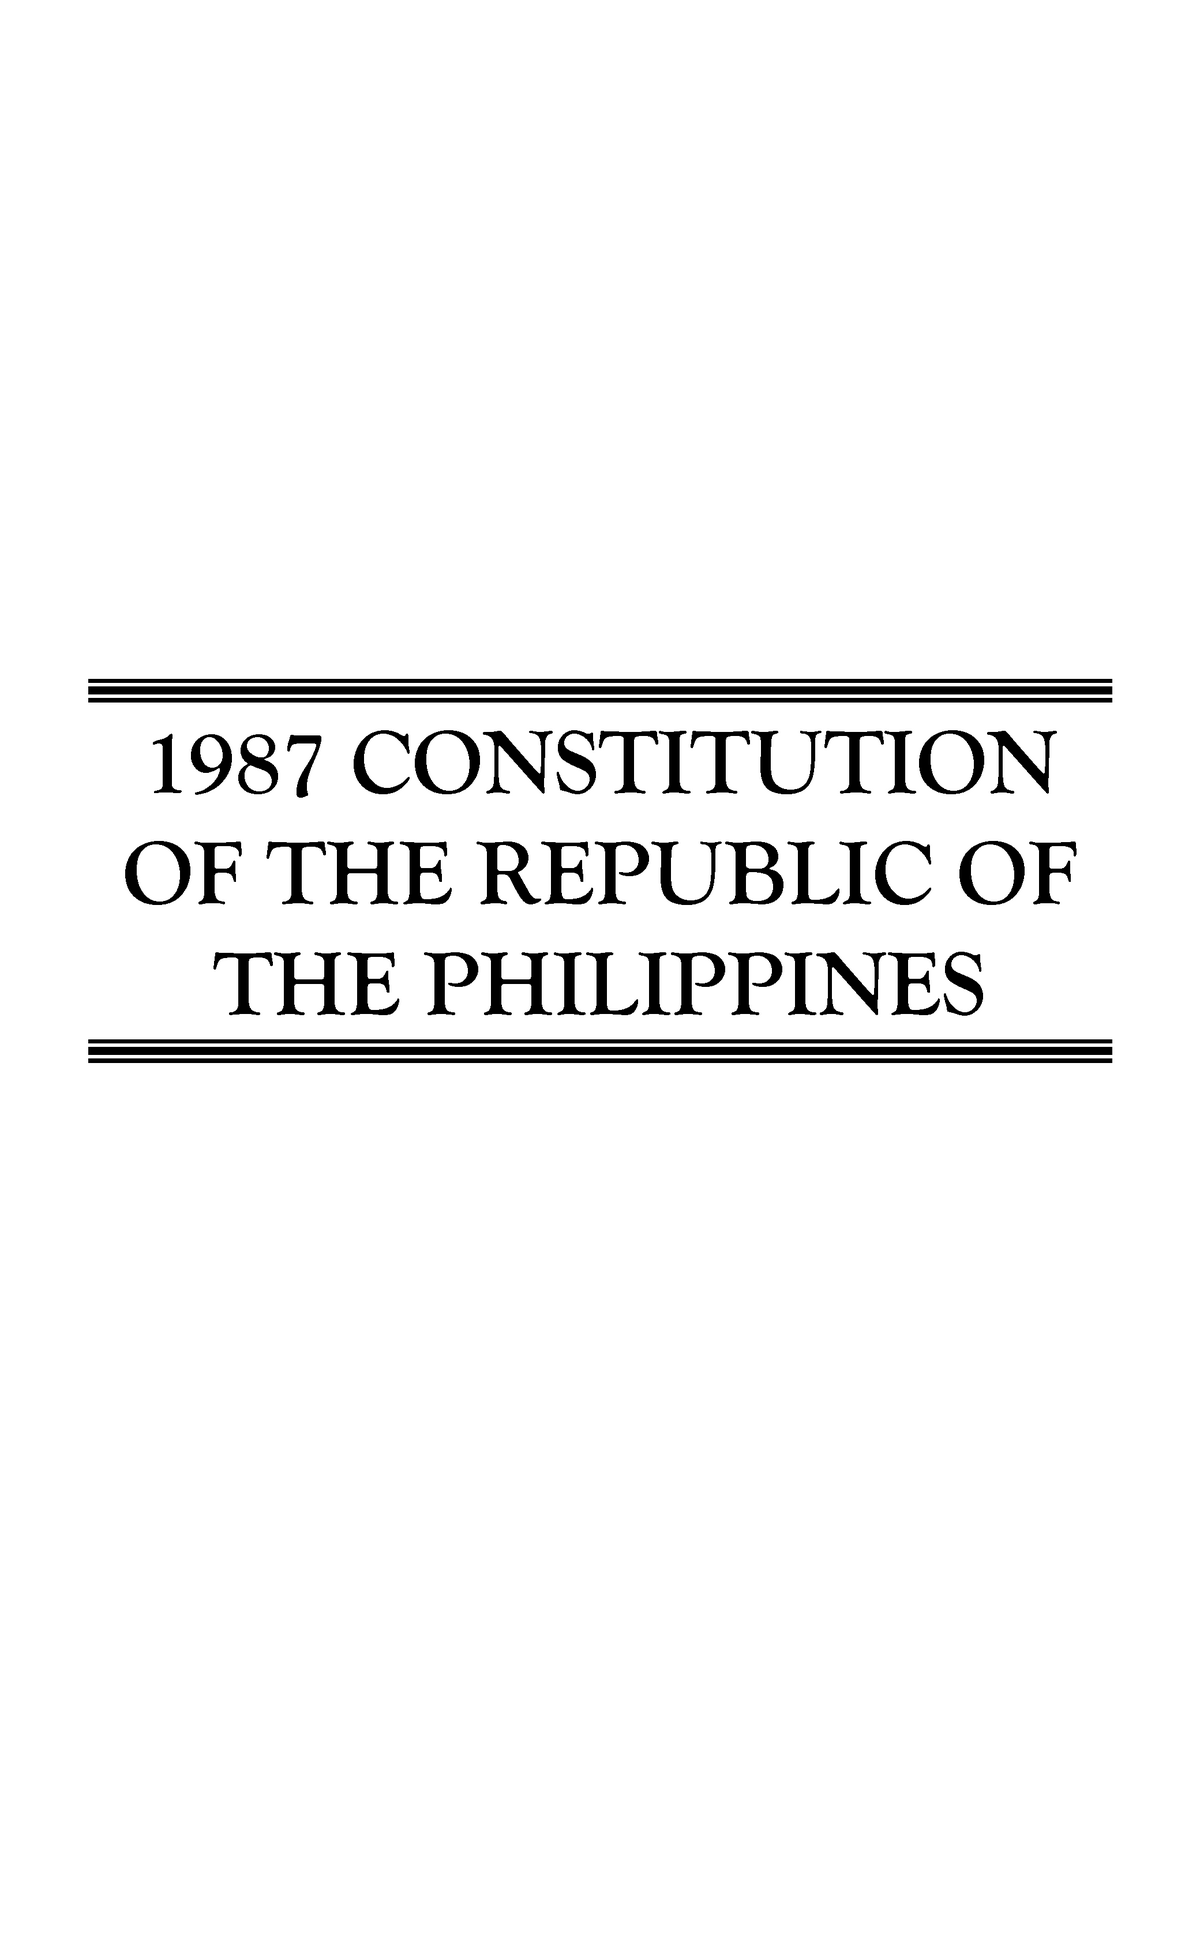 1987-philippine-constitution-pdf-for-those-without-copies-1987